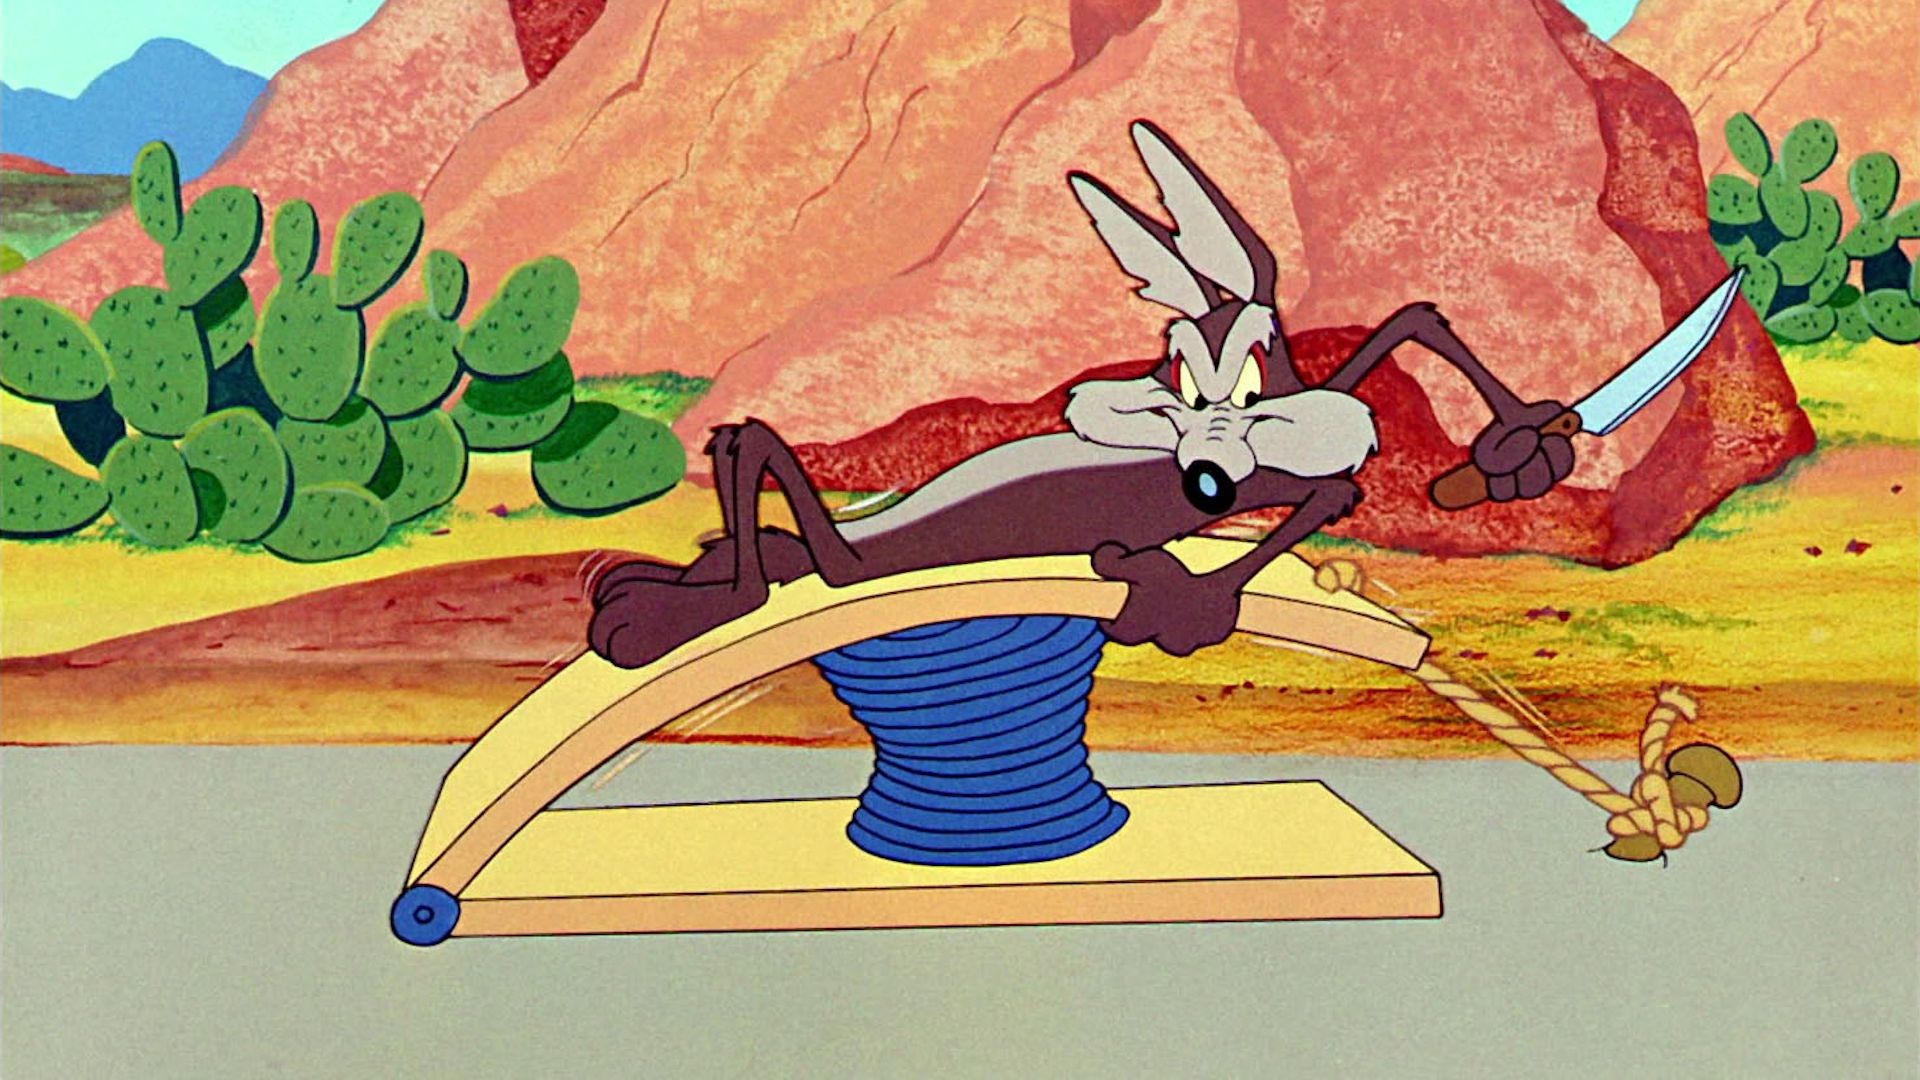 1920x1080 Road Runner and Wile E. Coyote